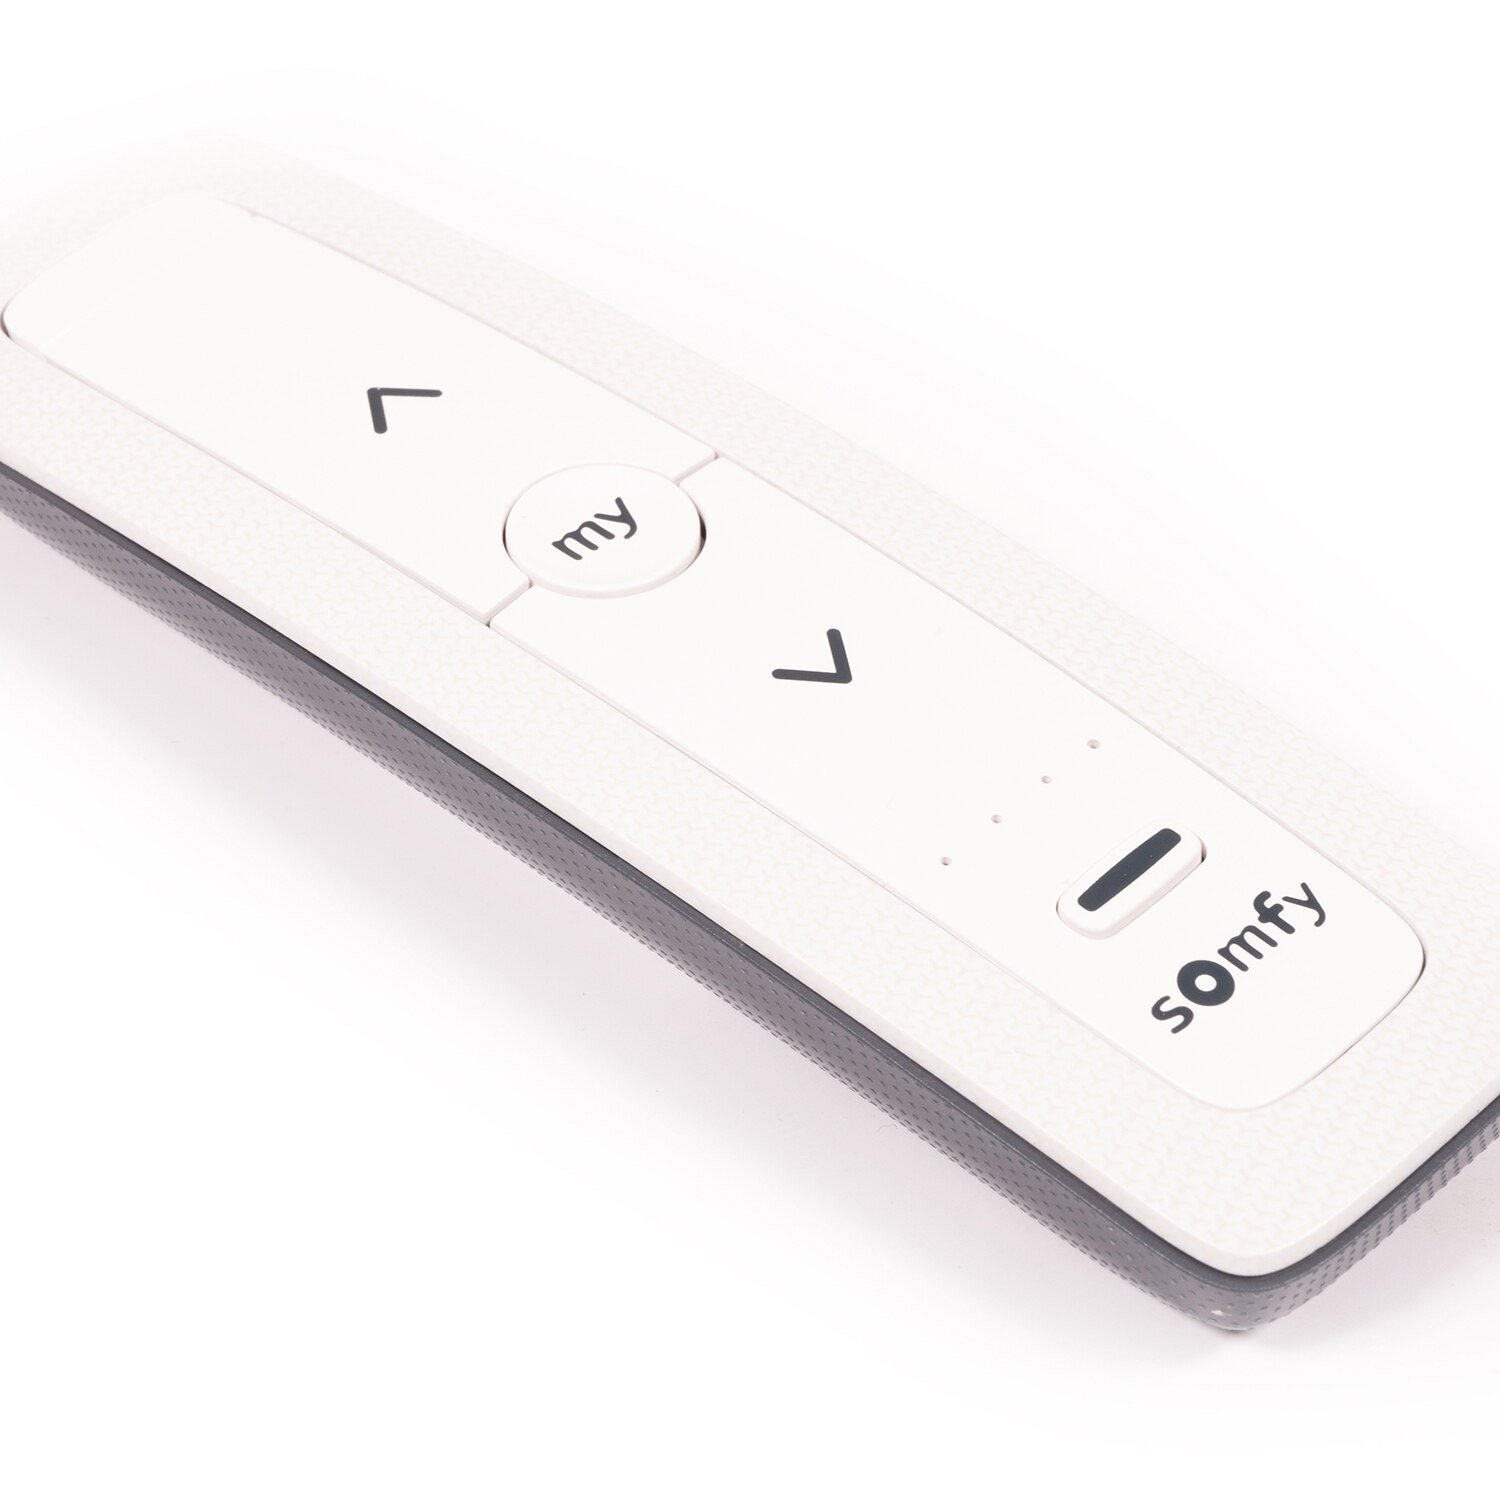 Somfy Situo 5-Channel RTS Arctic II Remote #1870578 (EDSO)